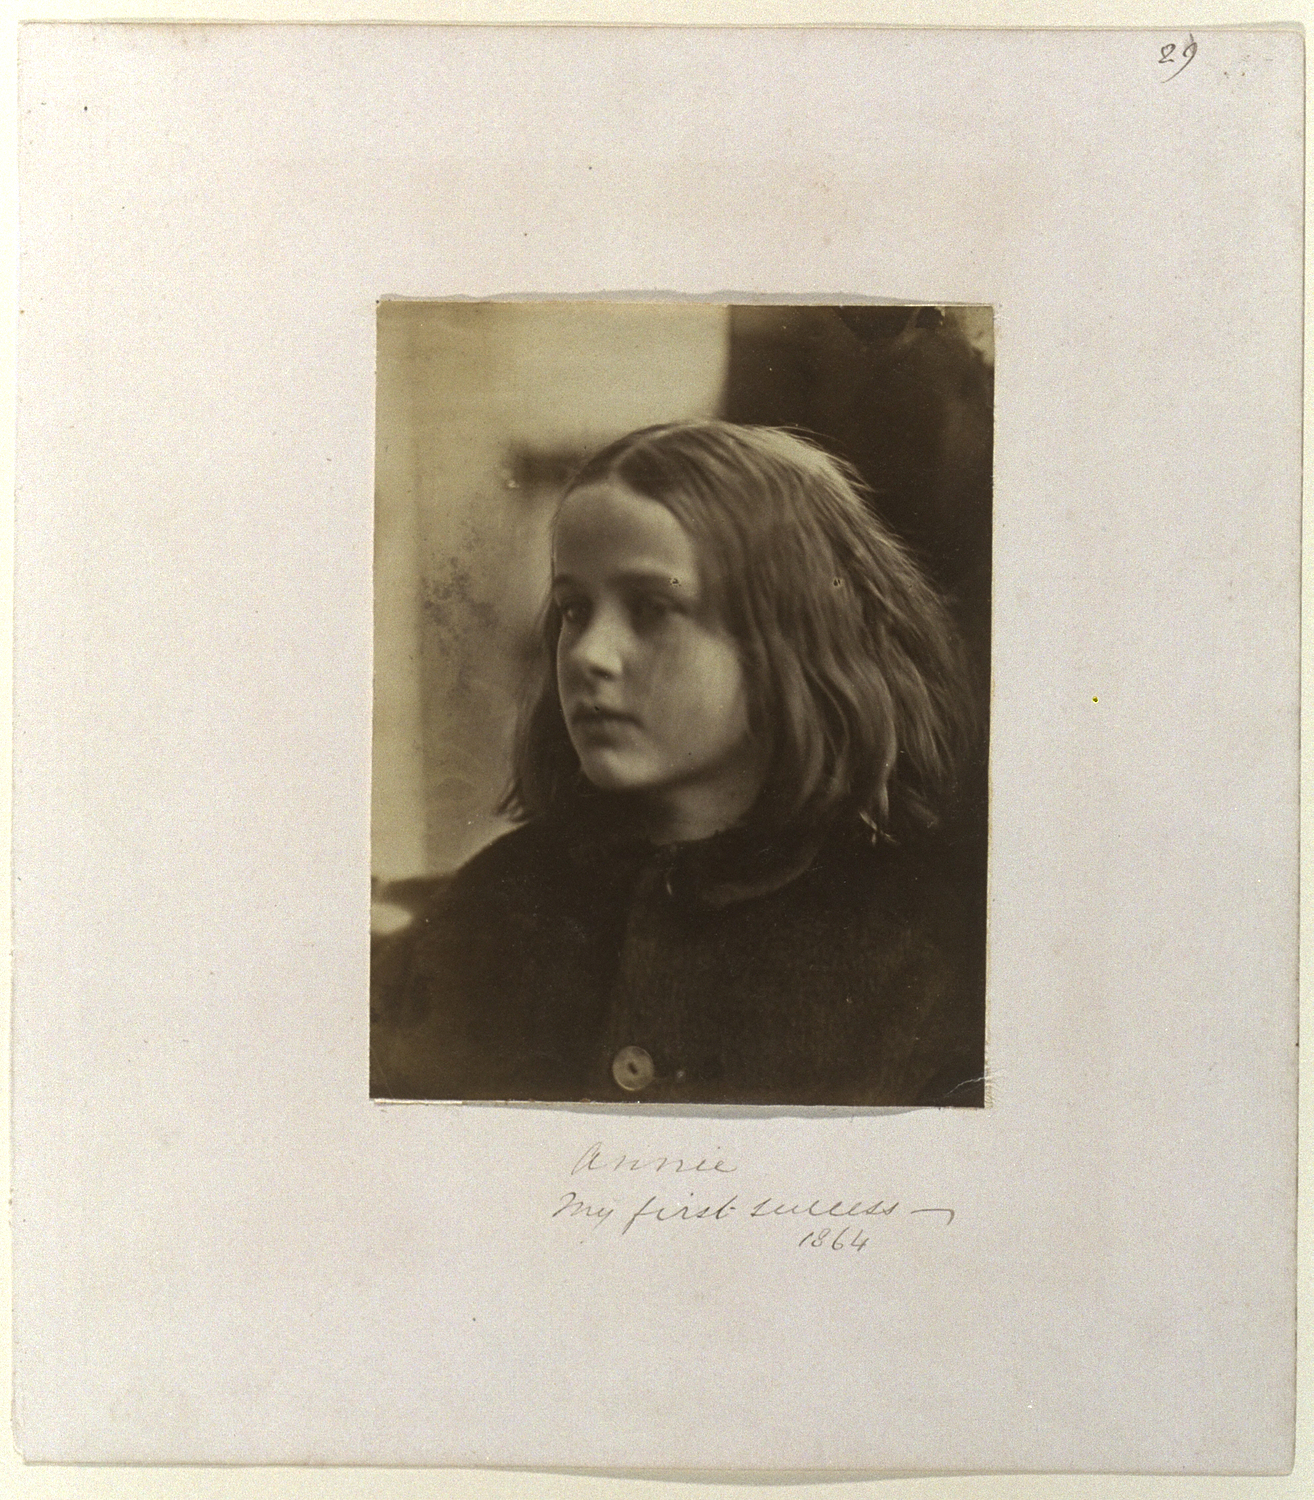 Photographic portrait of a young girl